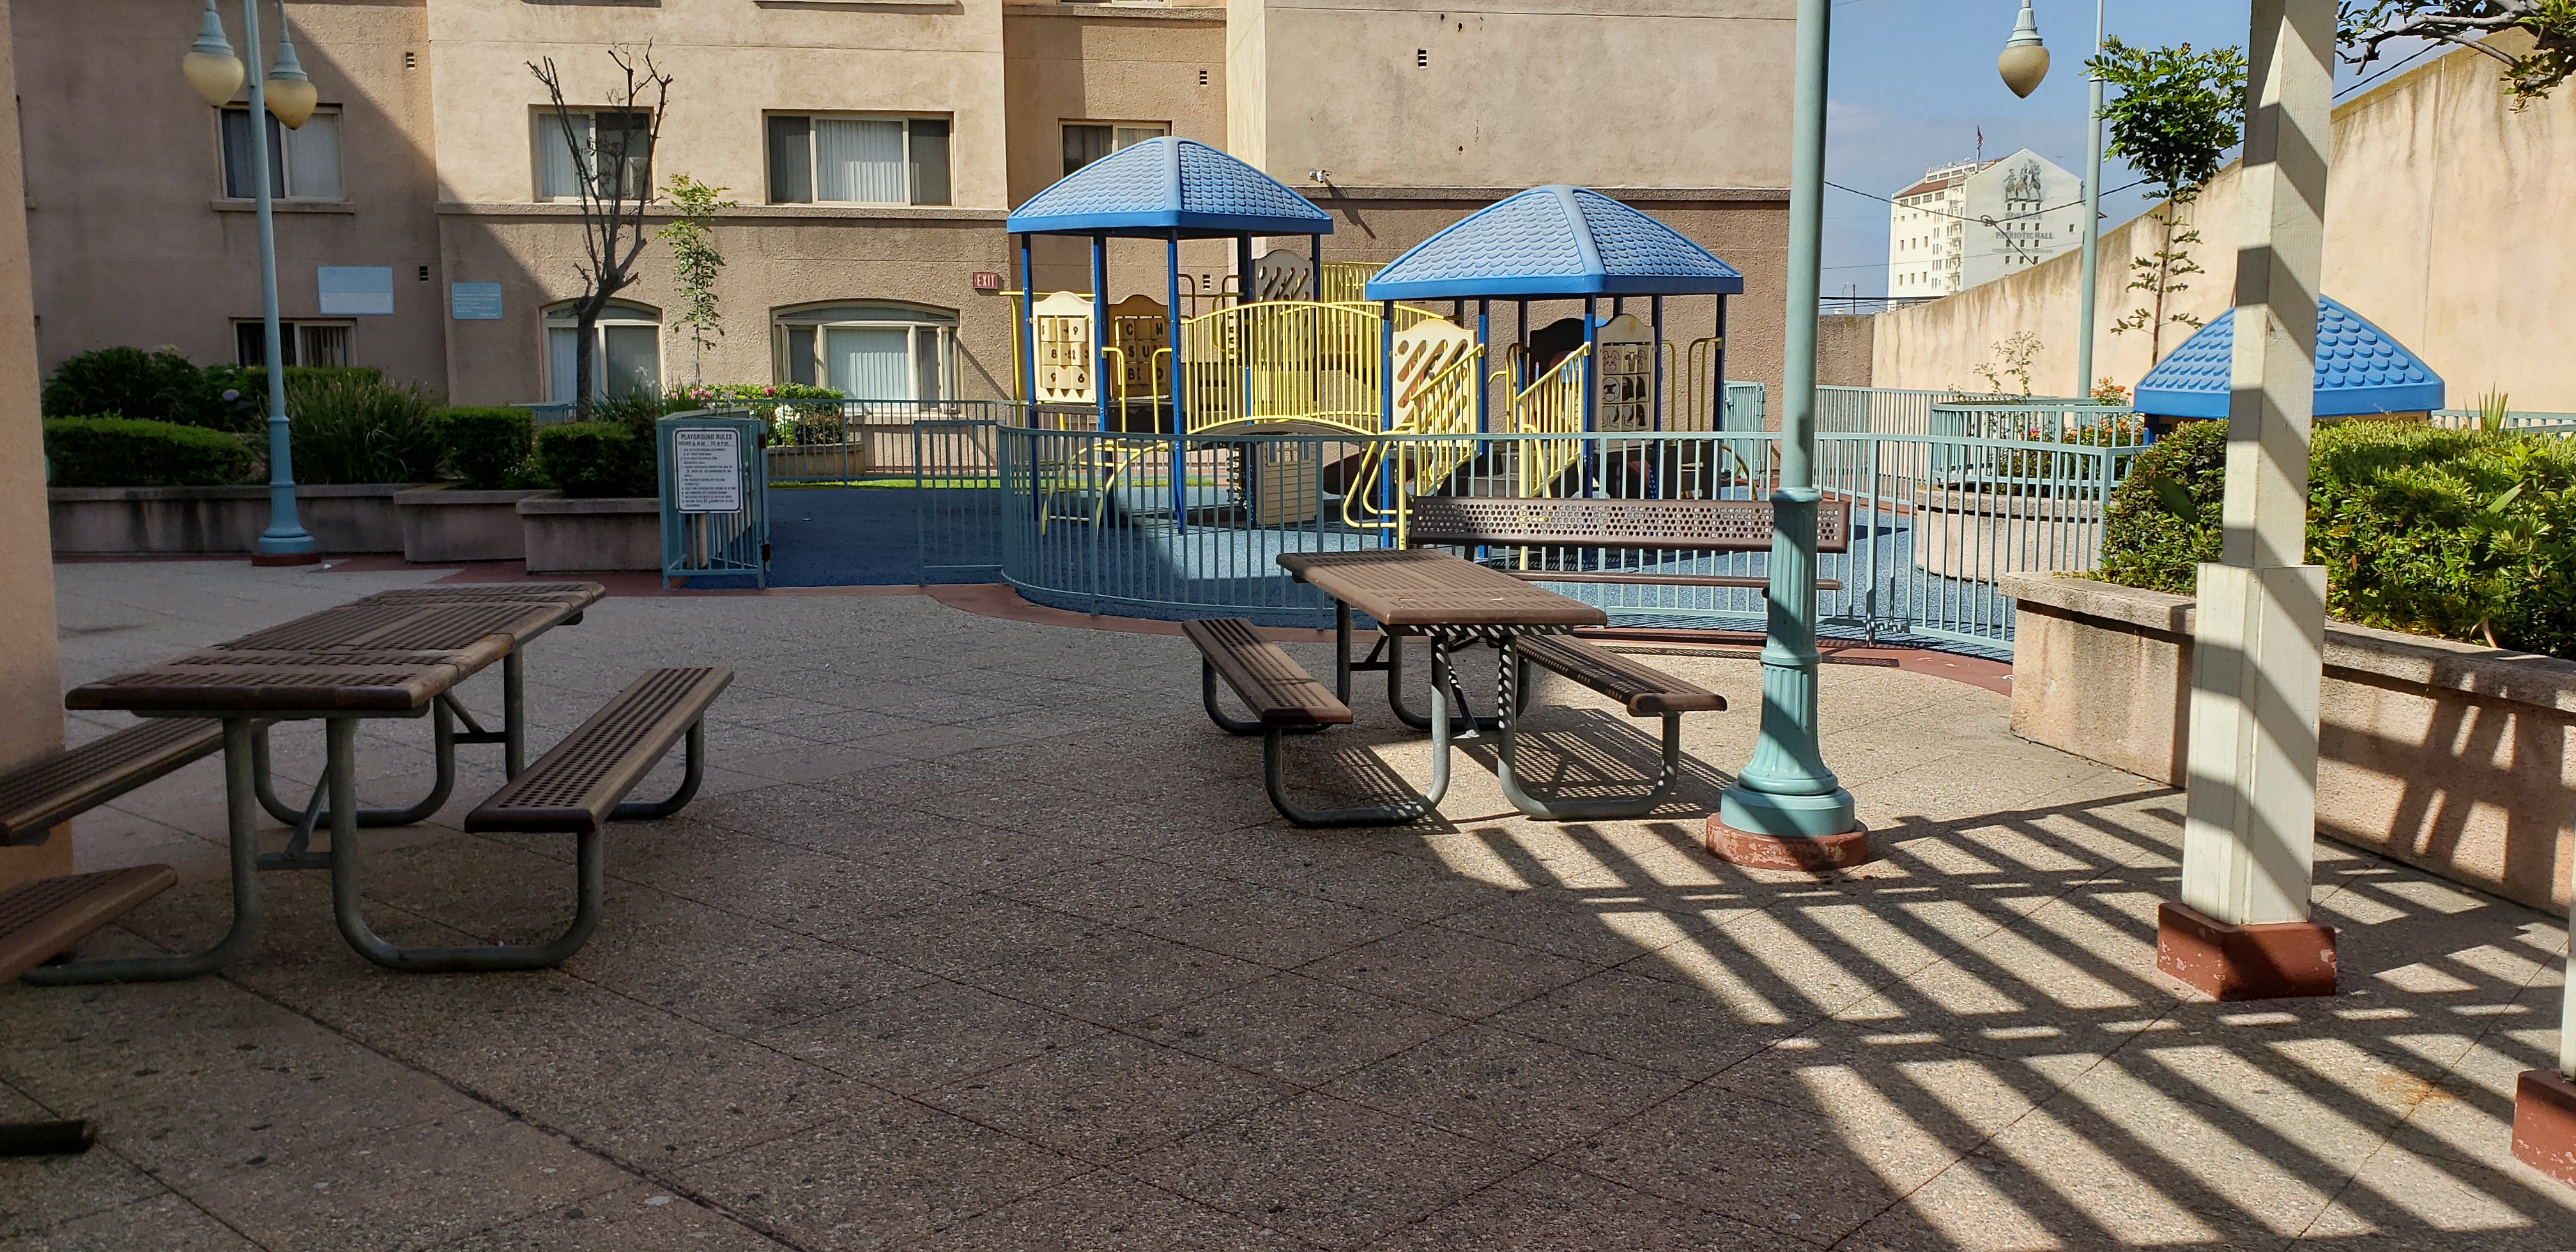 View of a fenced playground with padded flooring. There are a couple bench tables and a bench in front of it. There are plants and bushes around the area.